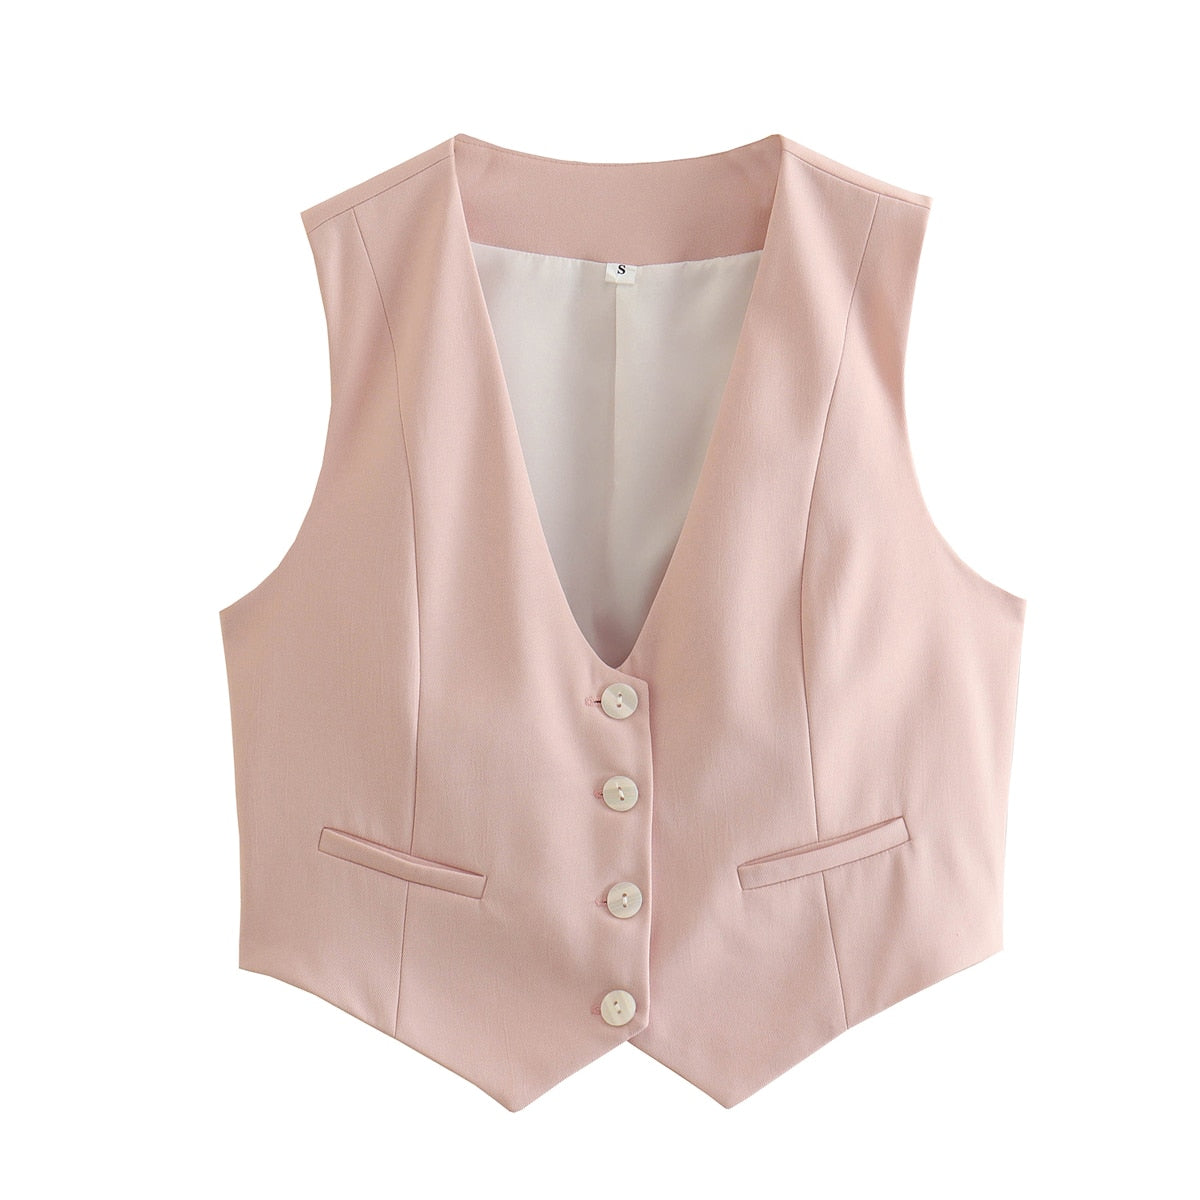 Fashion Women's Vest Summer Sleeveless Vests for Women Chic V-Neck Single-breasted Ladies White Waistcoat Tops New In Pink